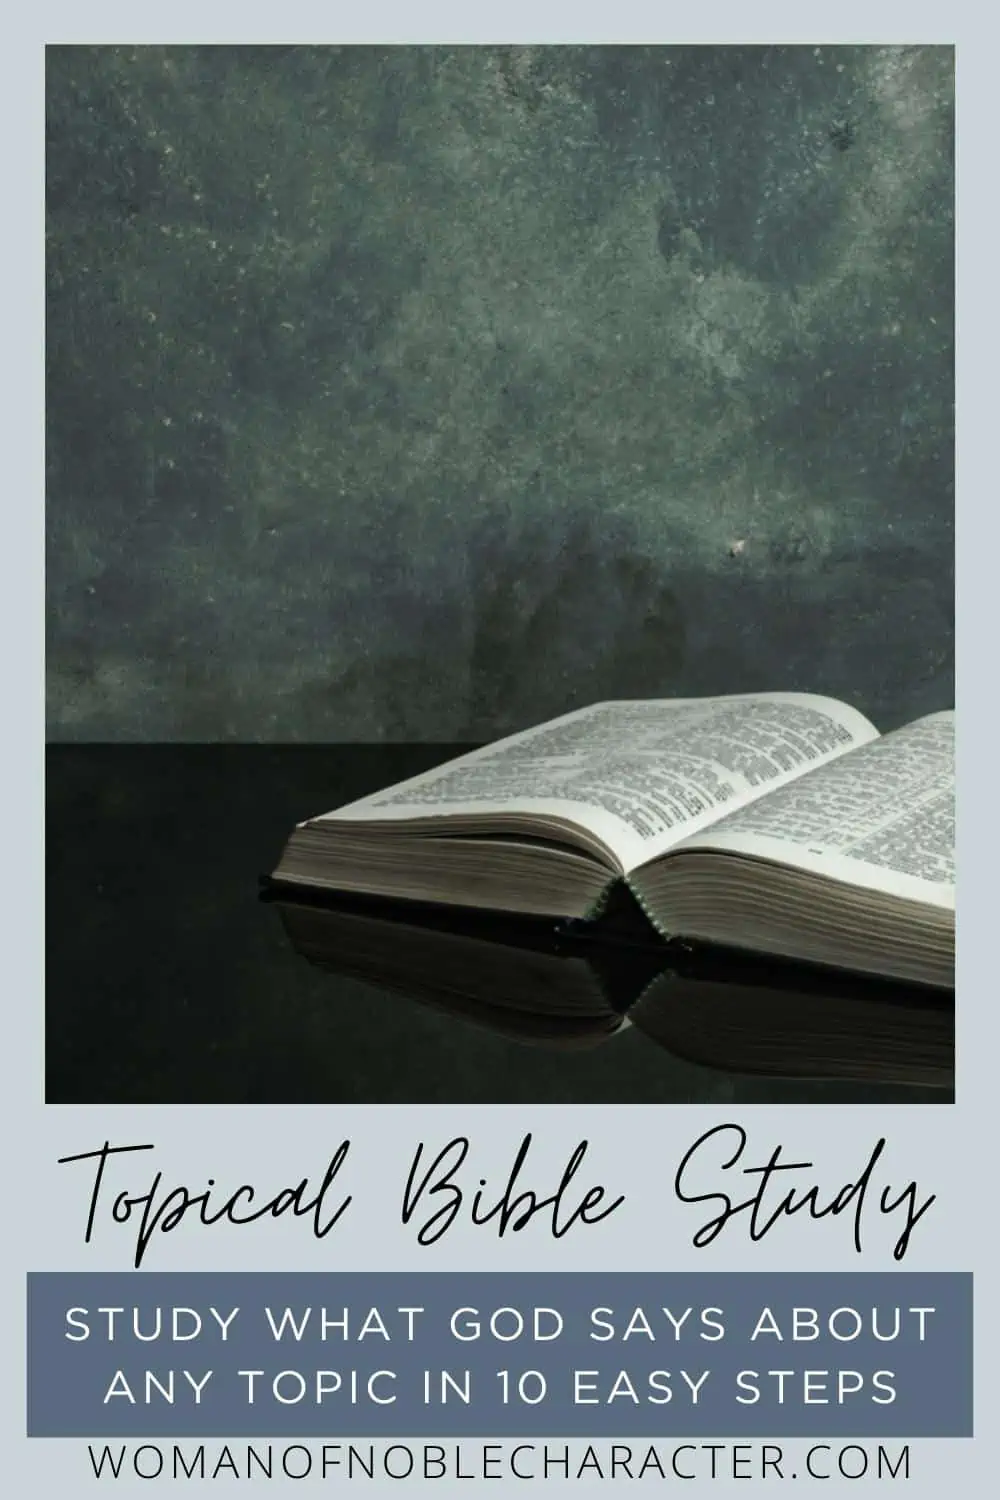 image of Bible on table with the text Topical Bible Study: Study What God Says About any Topic in 10 Easy Steps